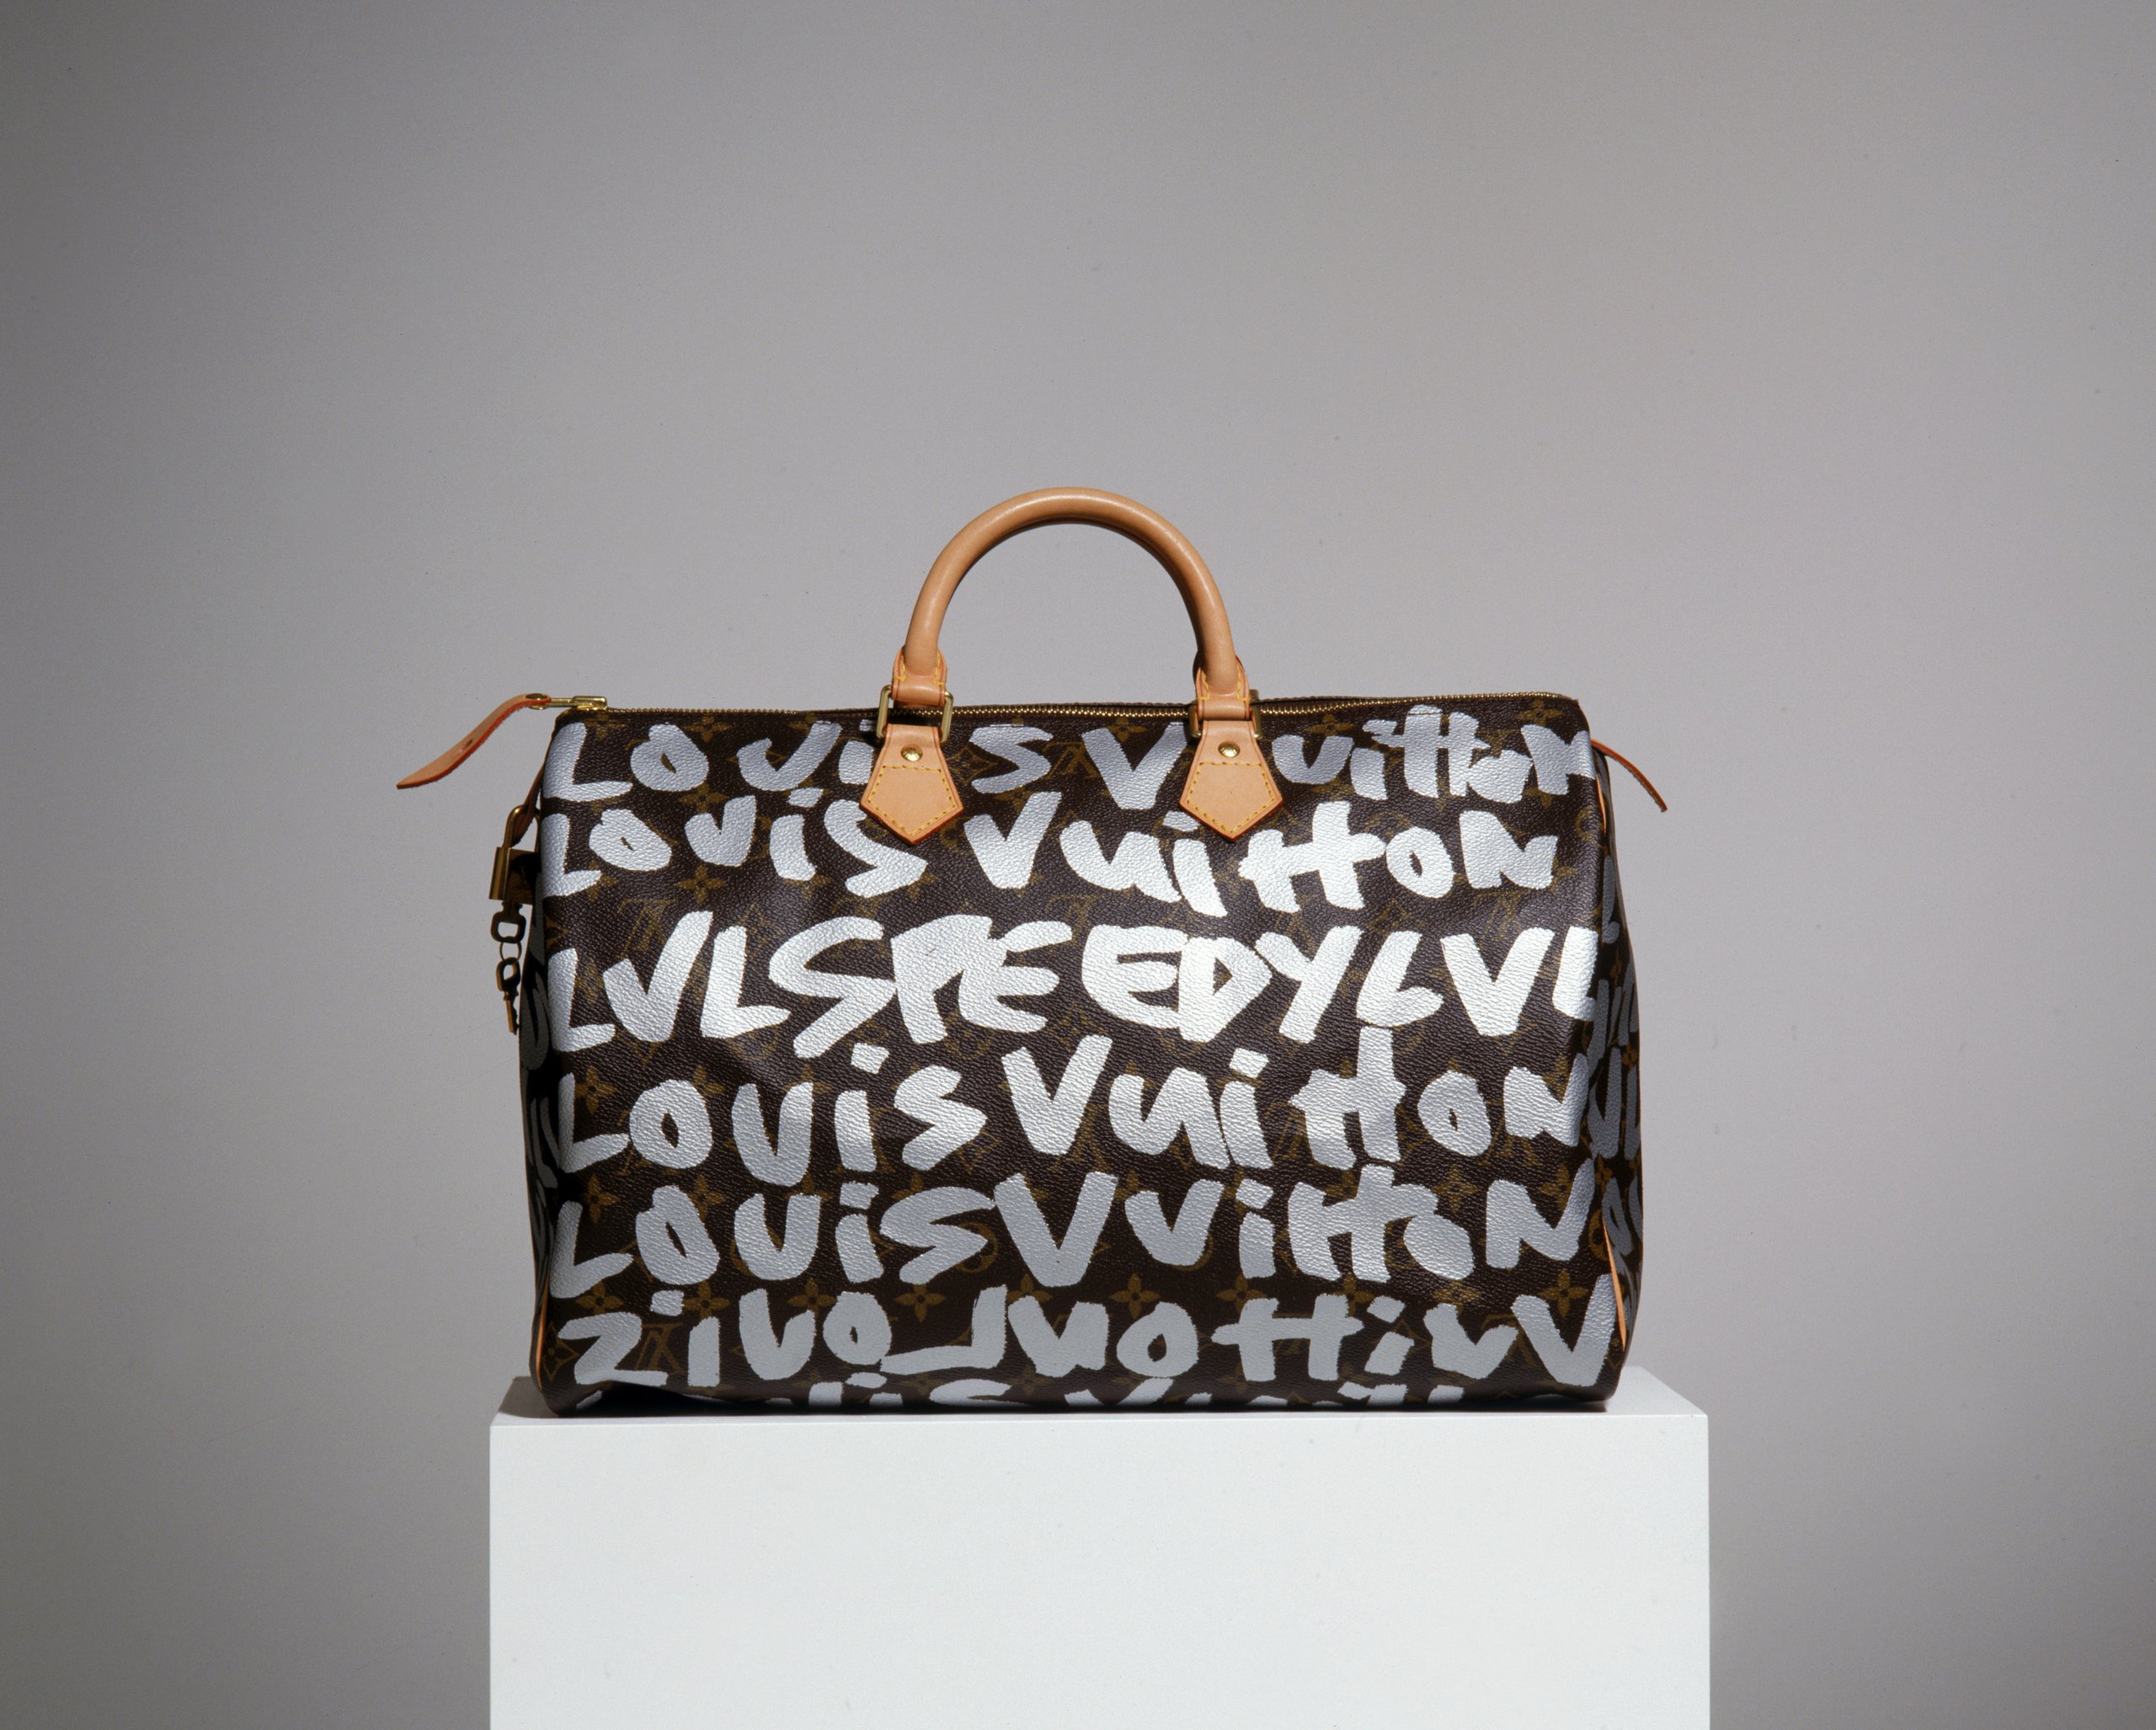 Louis Vuitton Spring/Summer 2018 Bag Collection Includes Speedy Doctor Bag  - Spotted Fashion